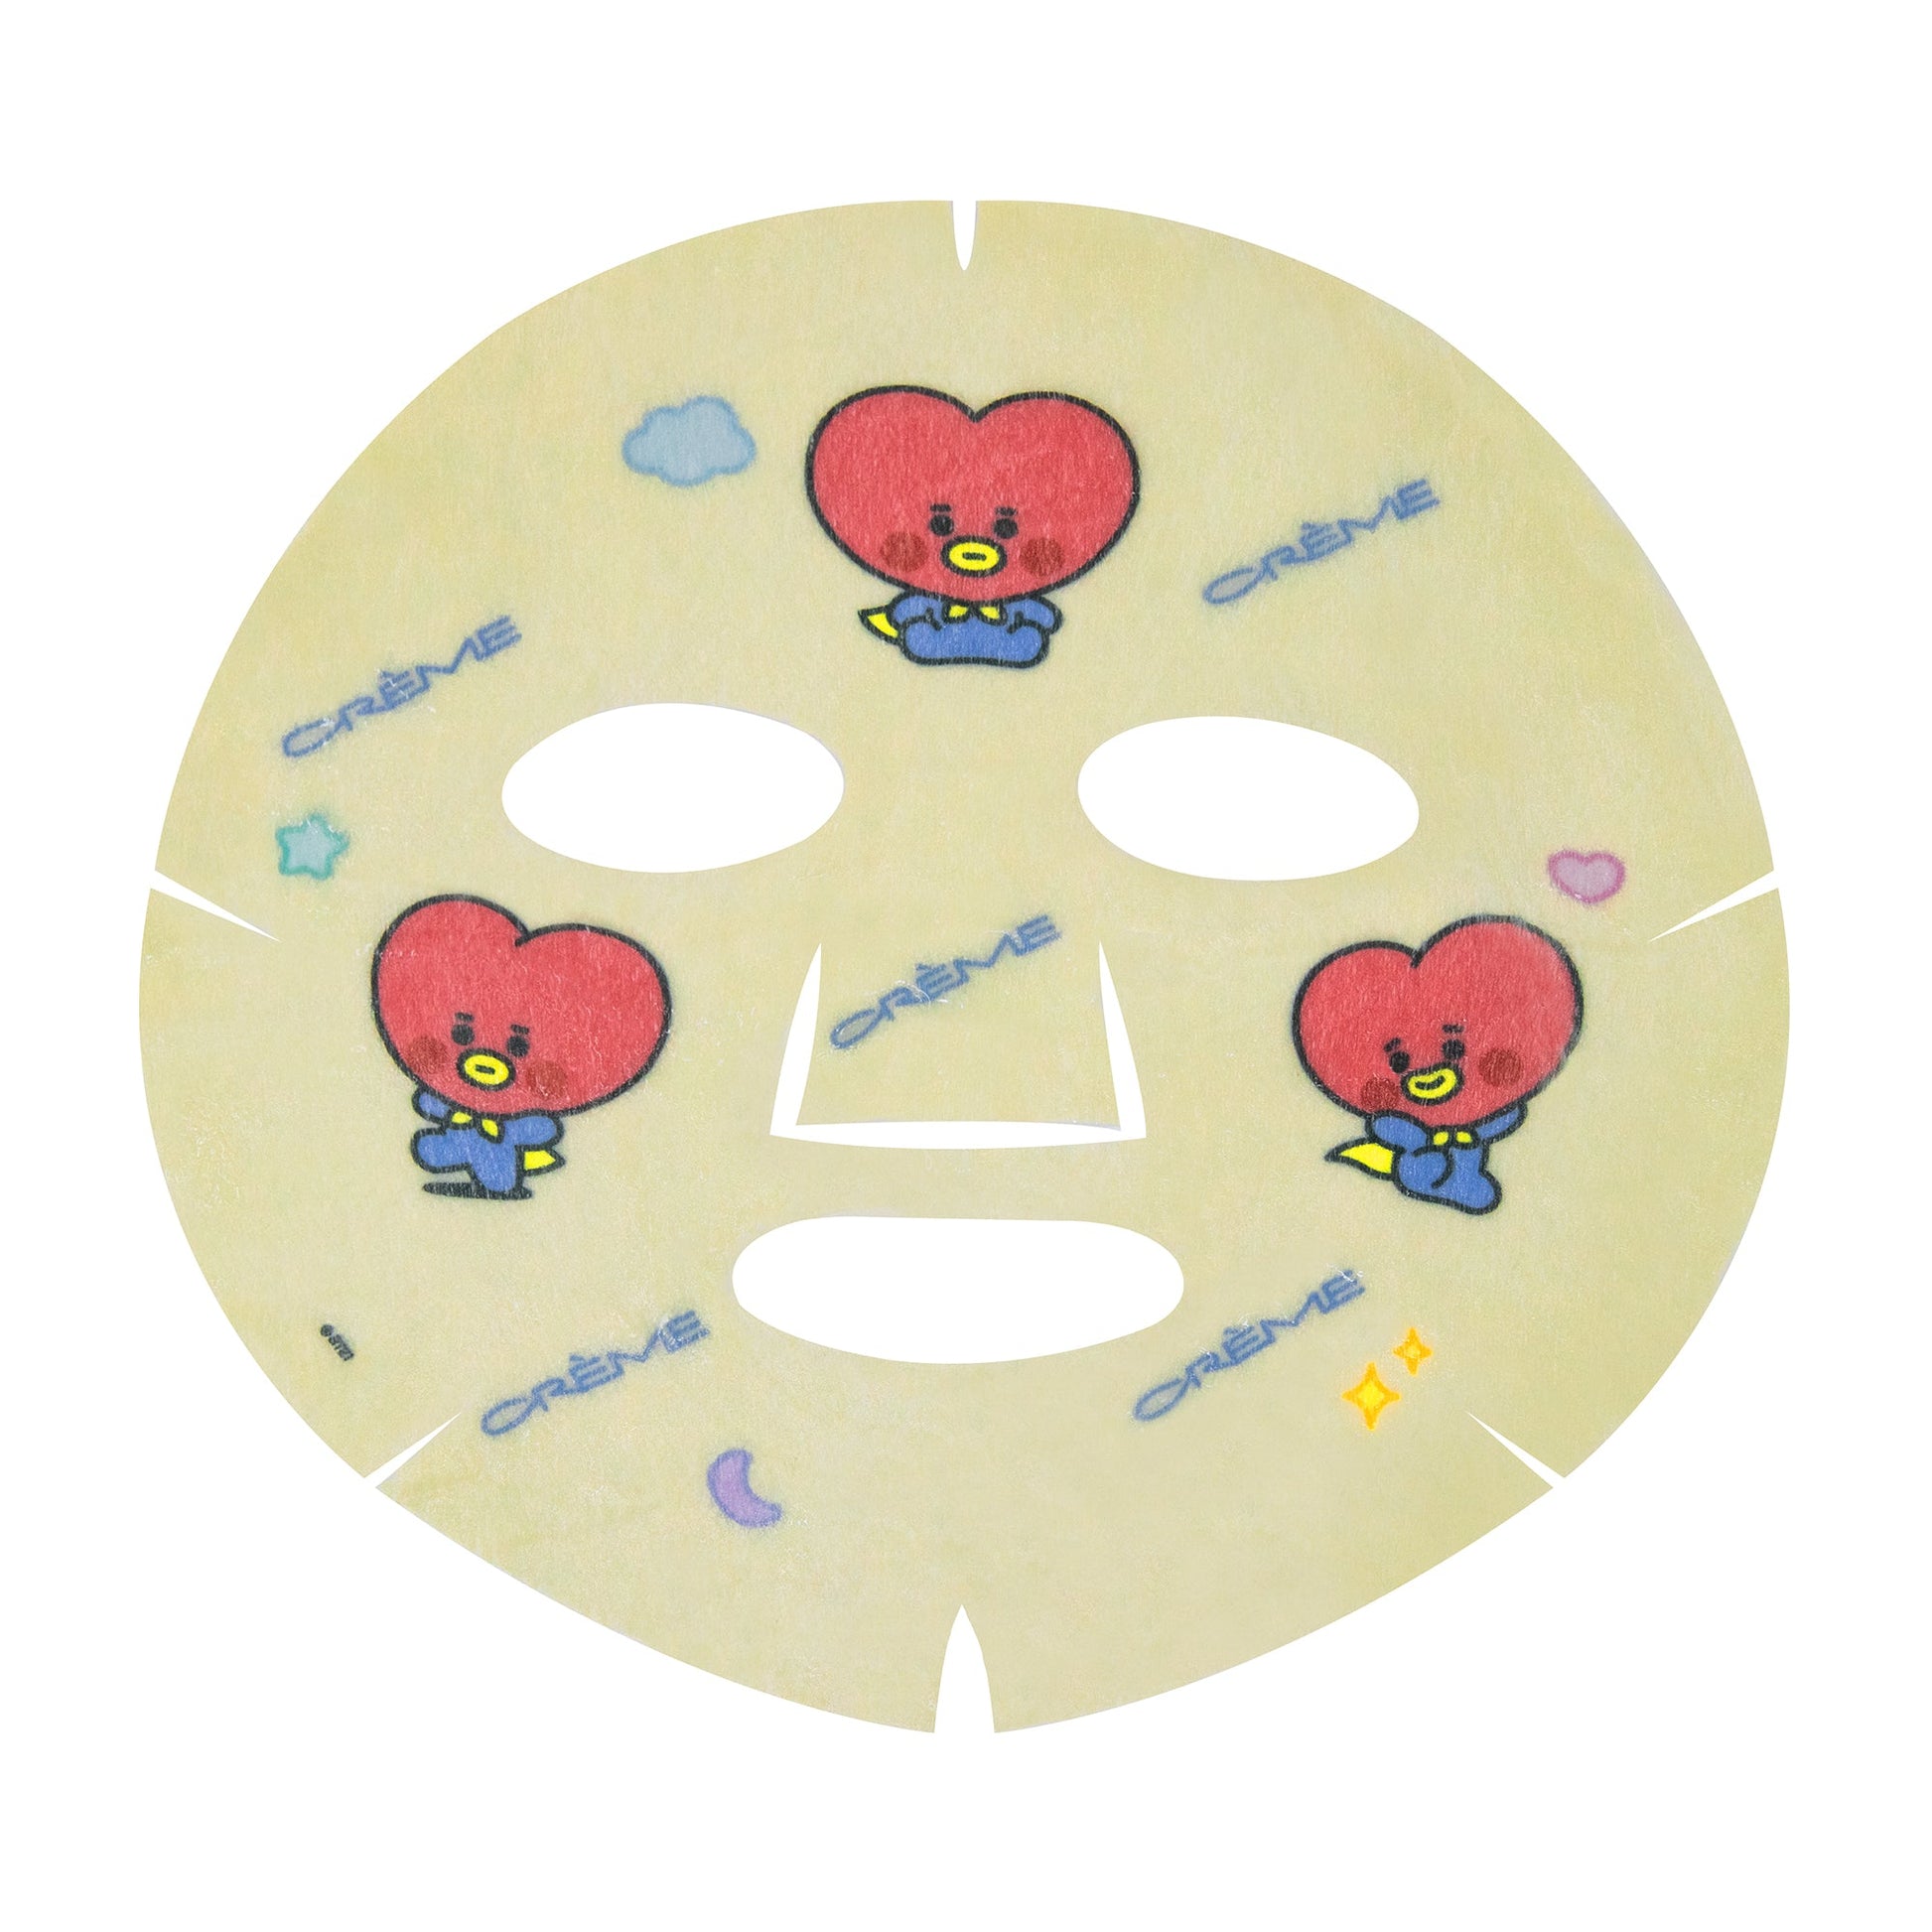 YOUTHFUL Like Baby TATA Printed Essence Sheet Mask (Allantoin, Milk Thistle, Strawberry Extract) Sheet masks The Crème Shop x BT21 BABY 